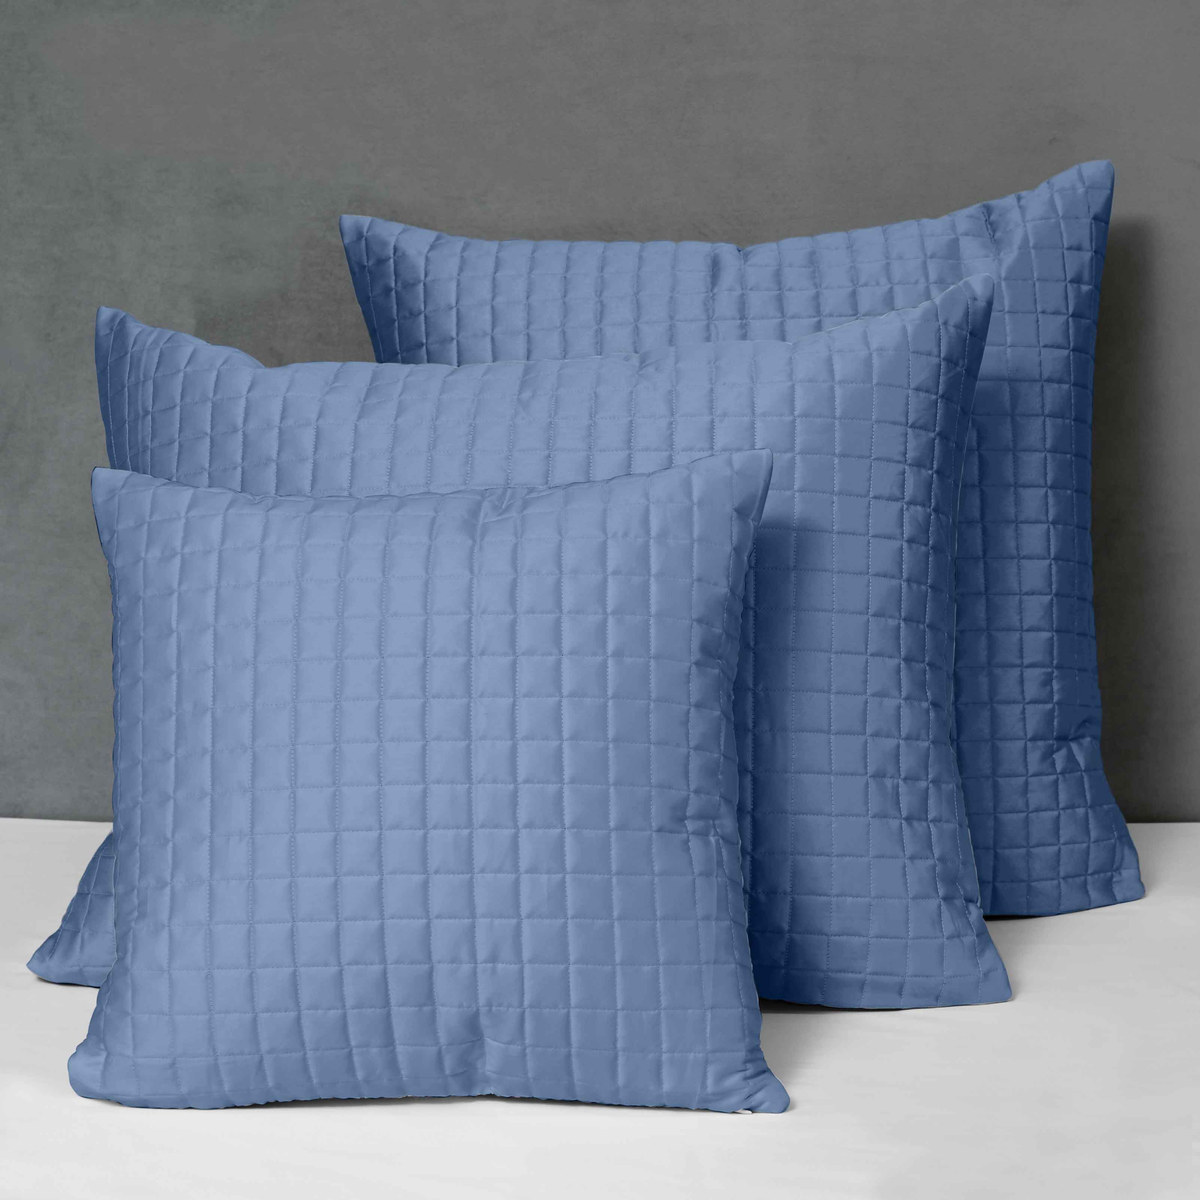 Different Sizes of Quilted Shams of Signoria Masaccio Bedding in Airforce Blue Color